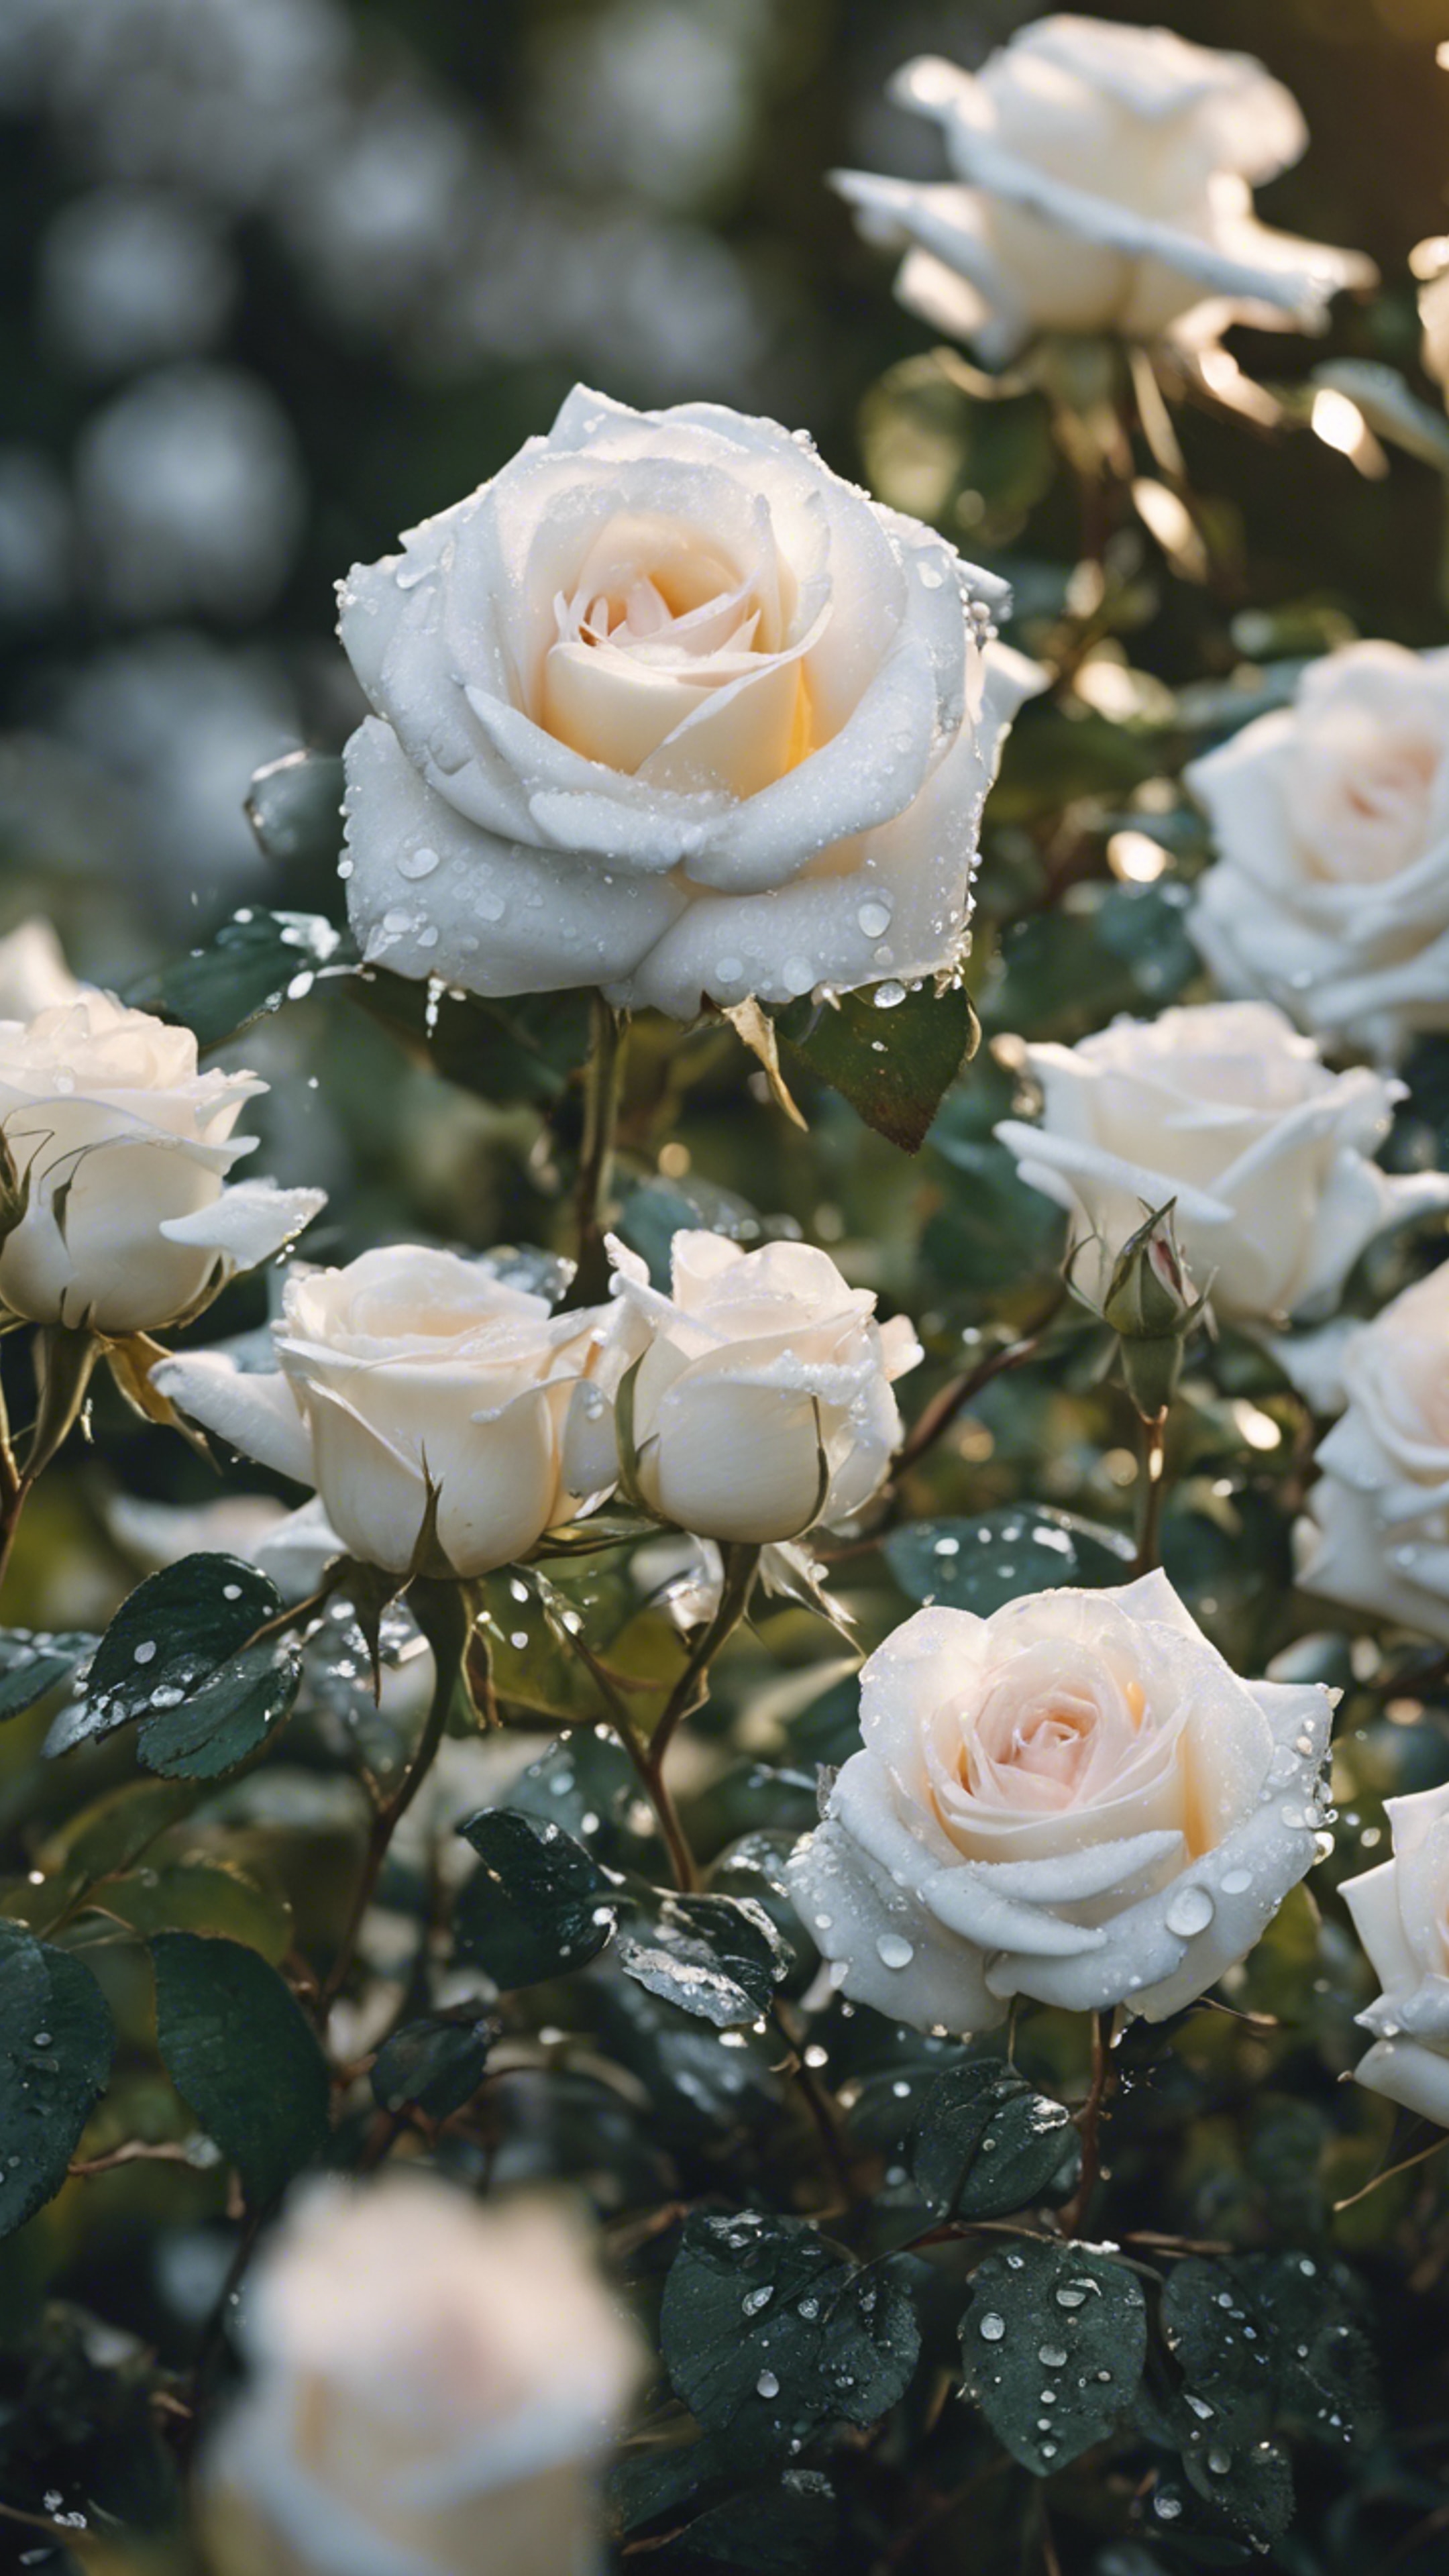 White roses covered in silver morning dew in a lush rose garden.壁紙[67c2c5bc62874412a2b6]